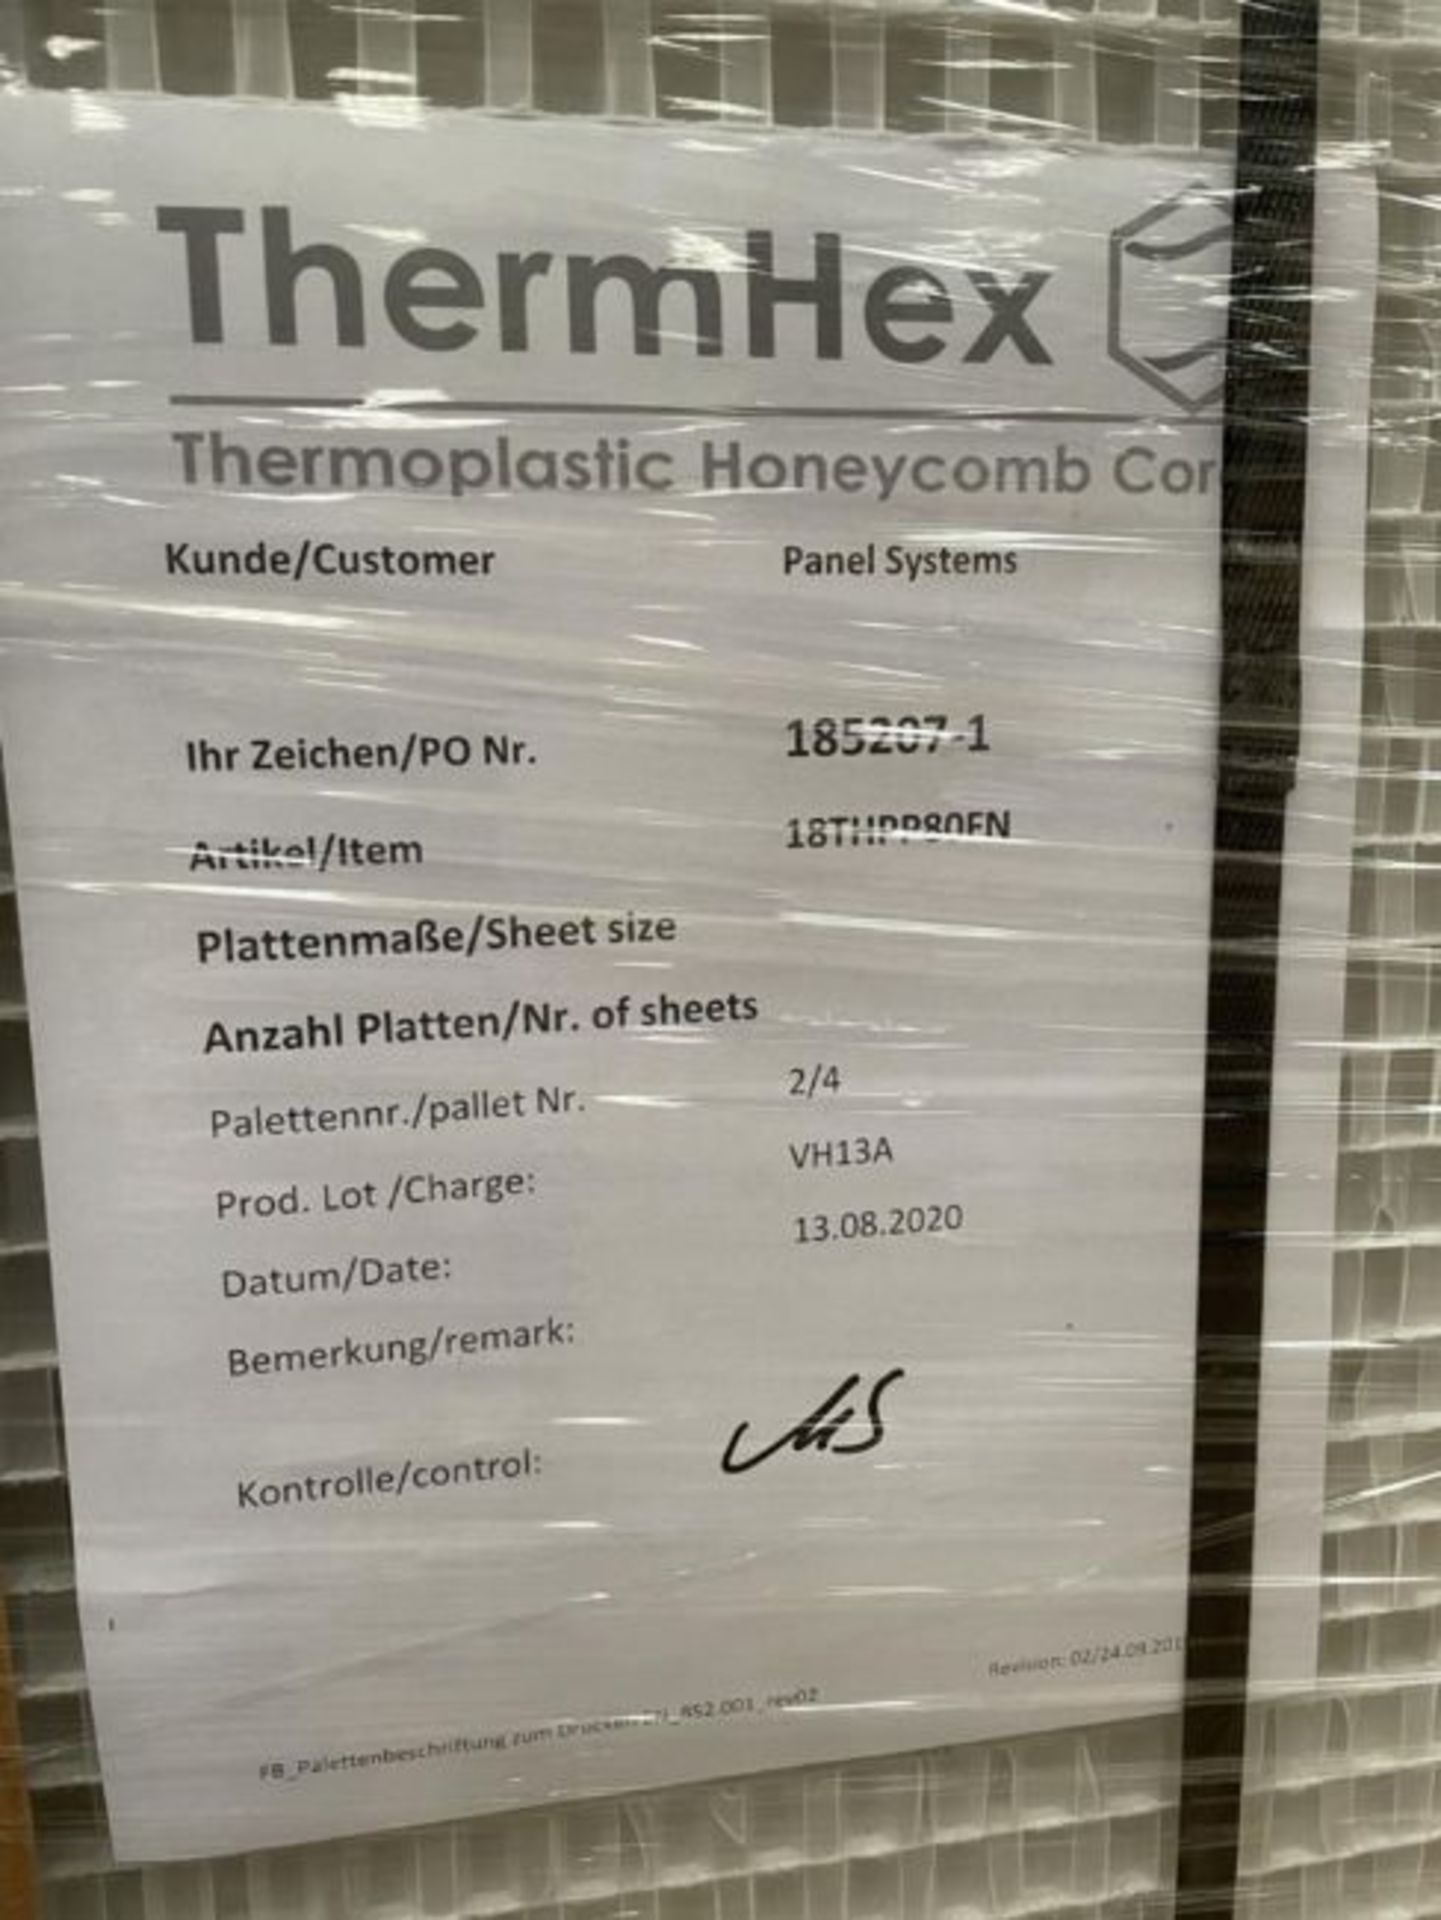 12 x ThermHex Thermoplastic Honeycomb Core Panels - Size 693 x 1210 x 20mm - New Stock - Lightweight - Image 7 of 10